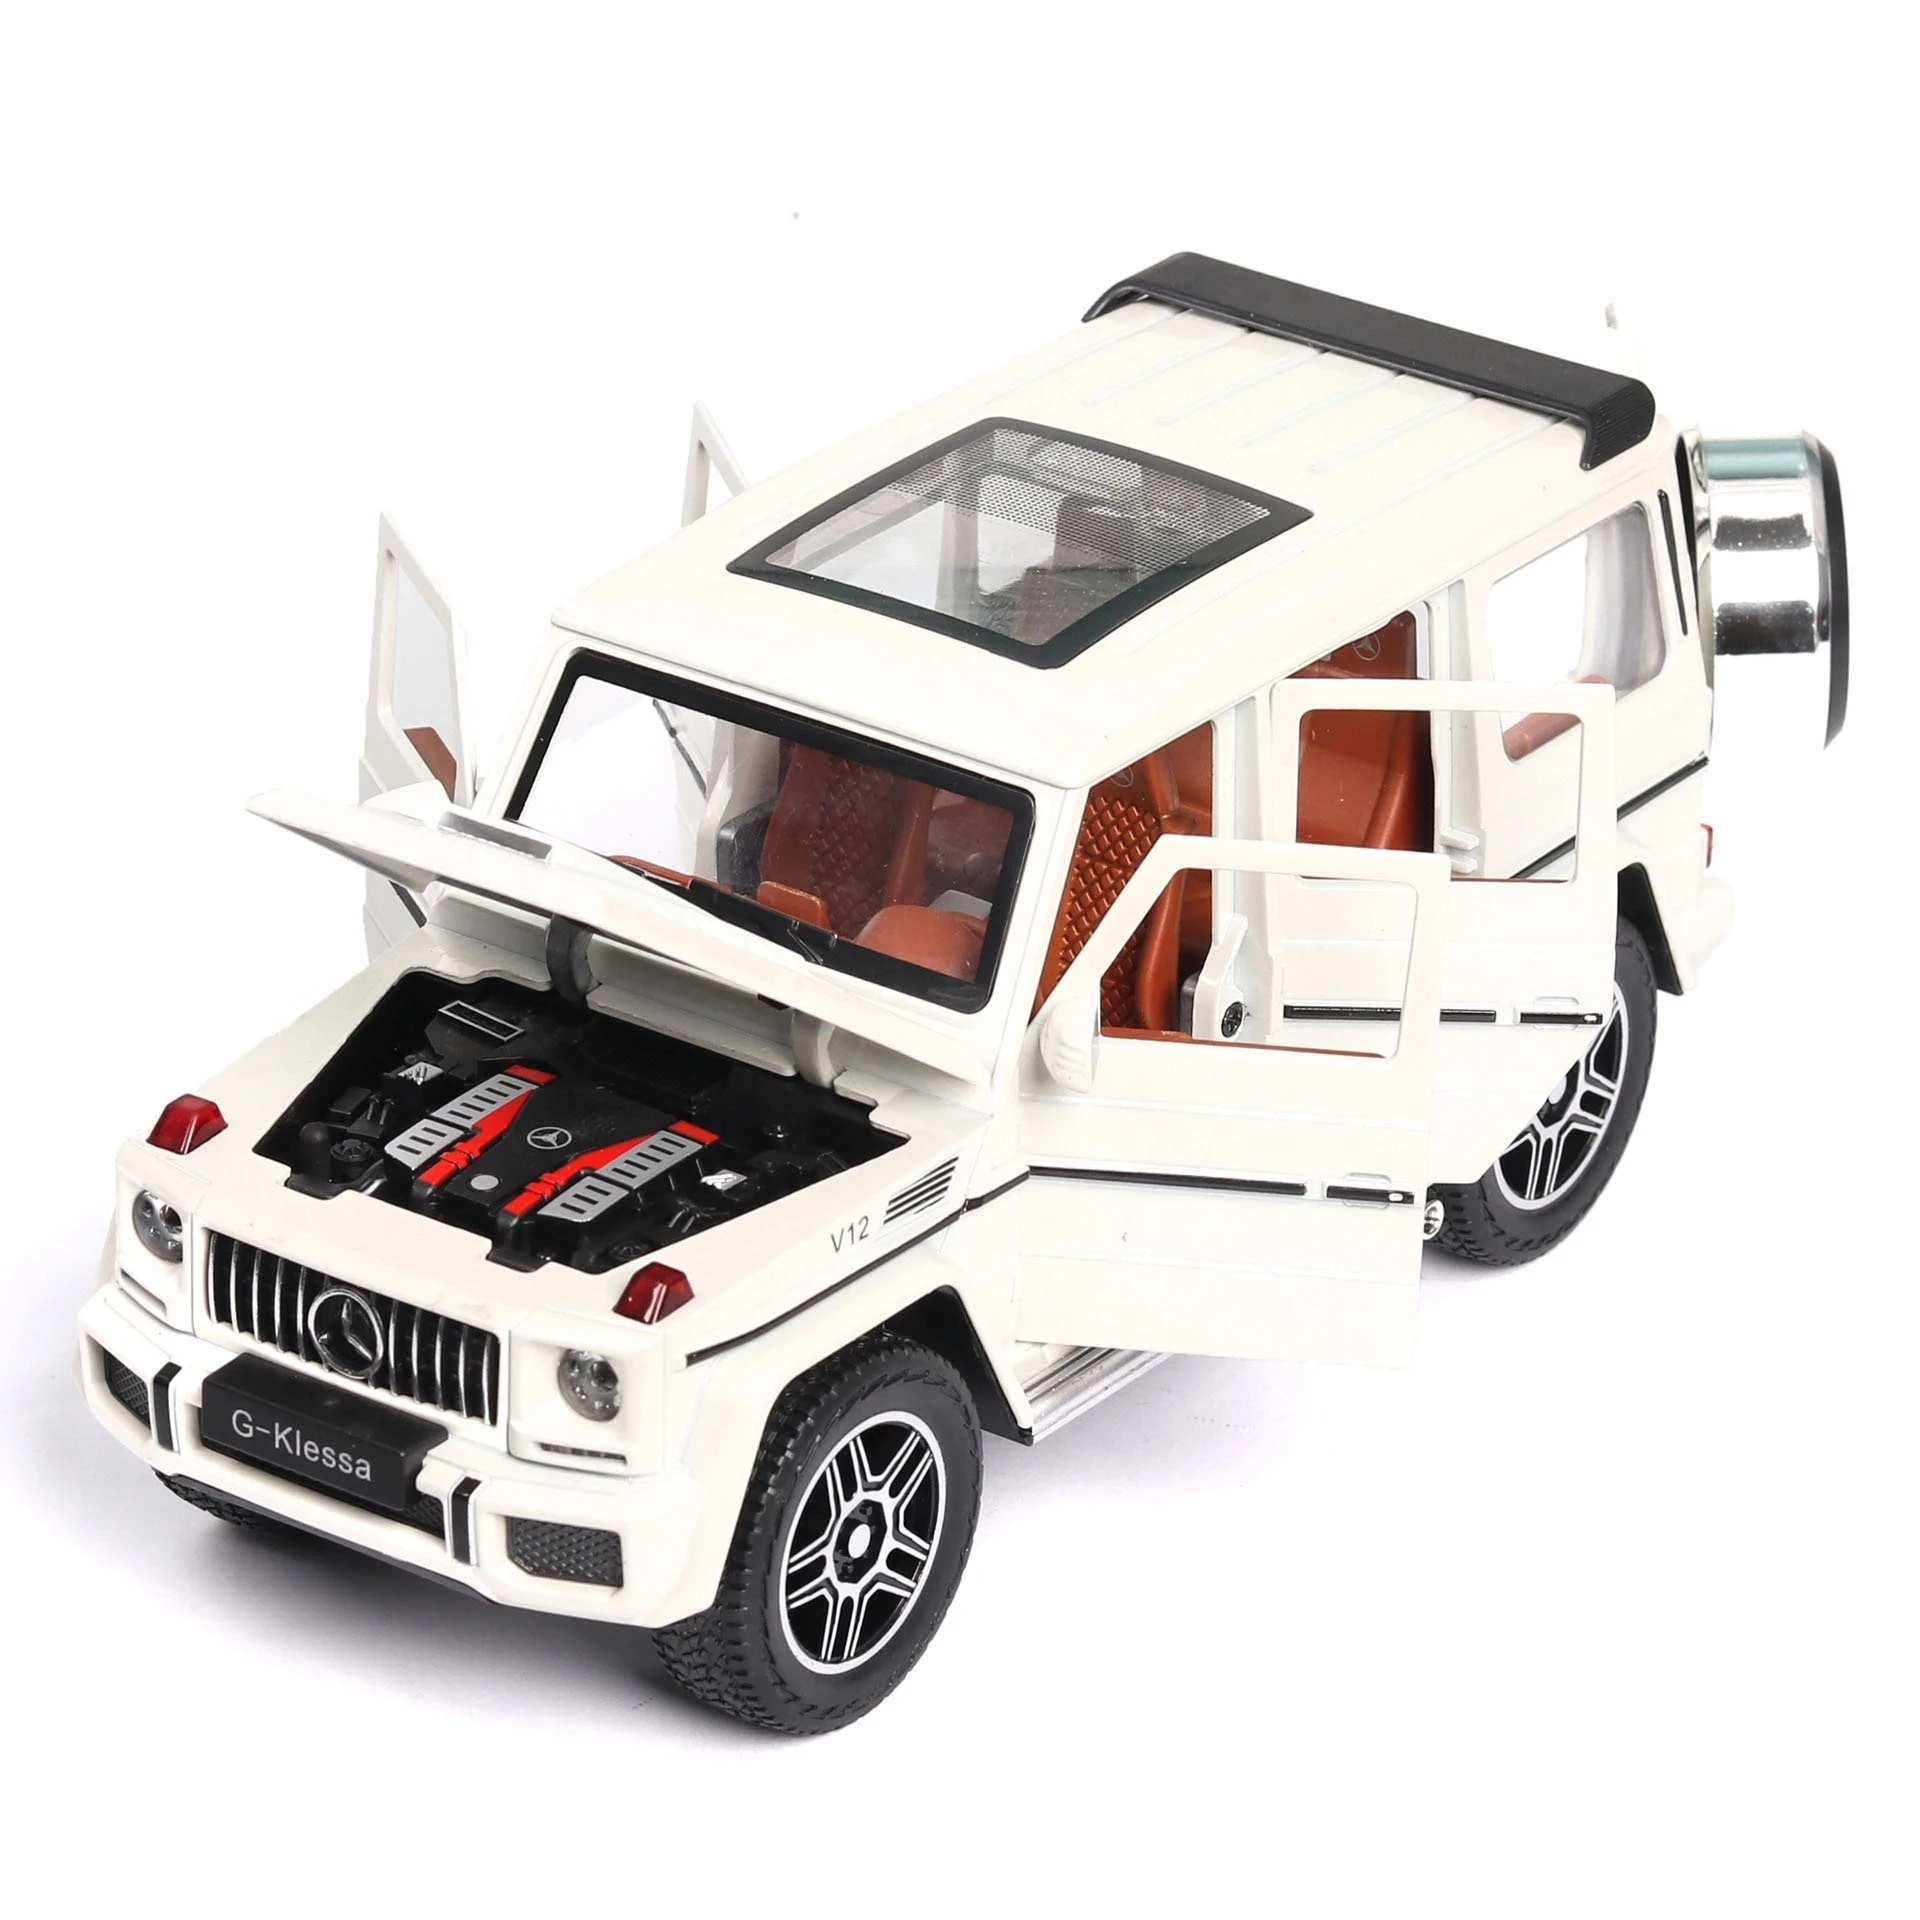 

1:24 Diecast Toy Car Model Metal Toy Vehicle Wheels G65 High Simulation Sound And Light Pull Back Car Collection Kids Toys Gift